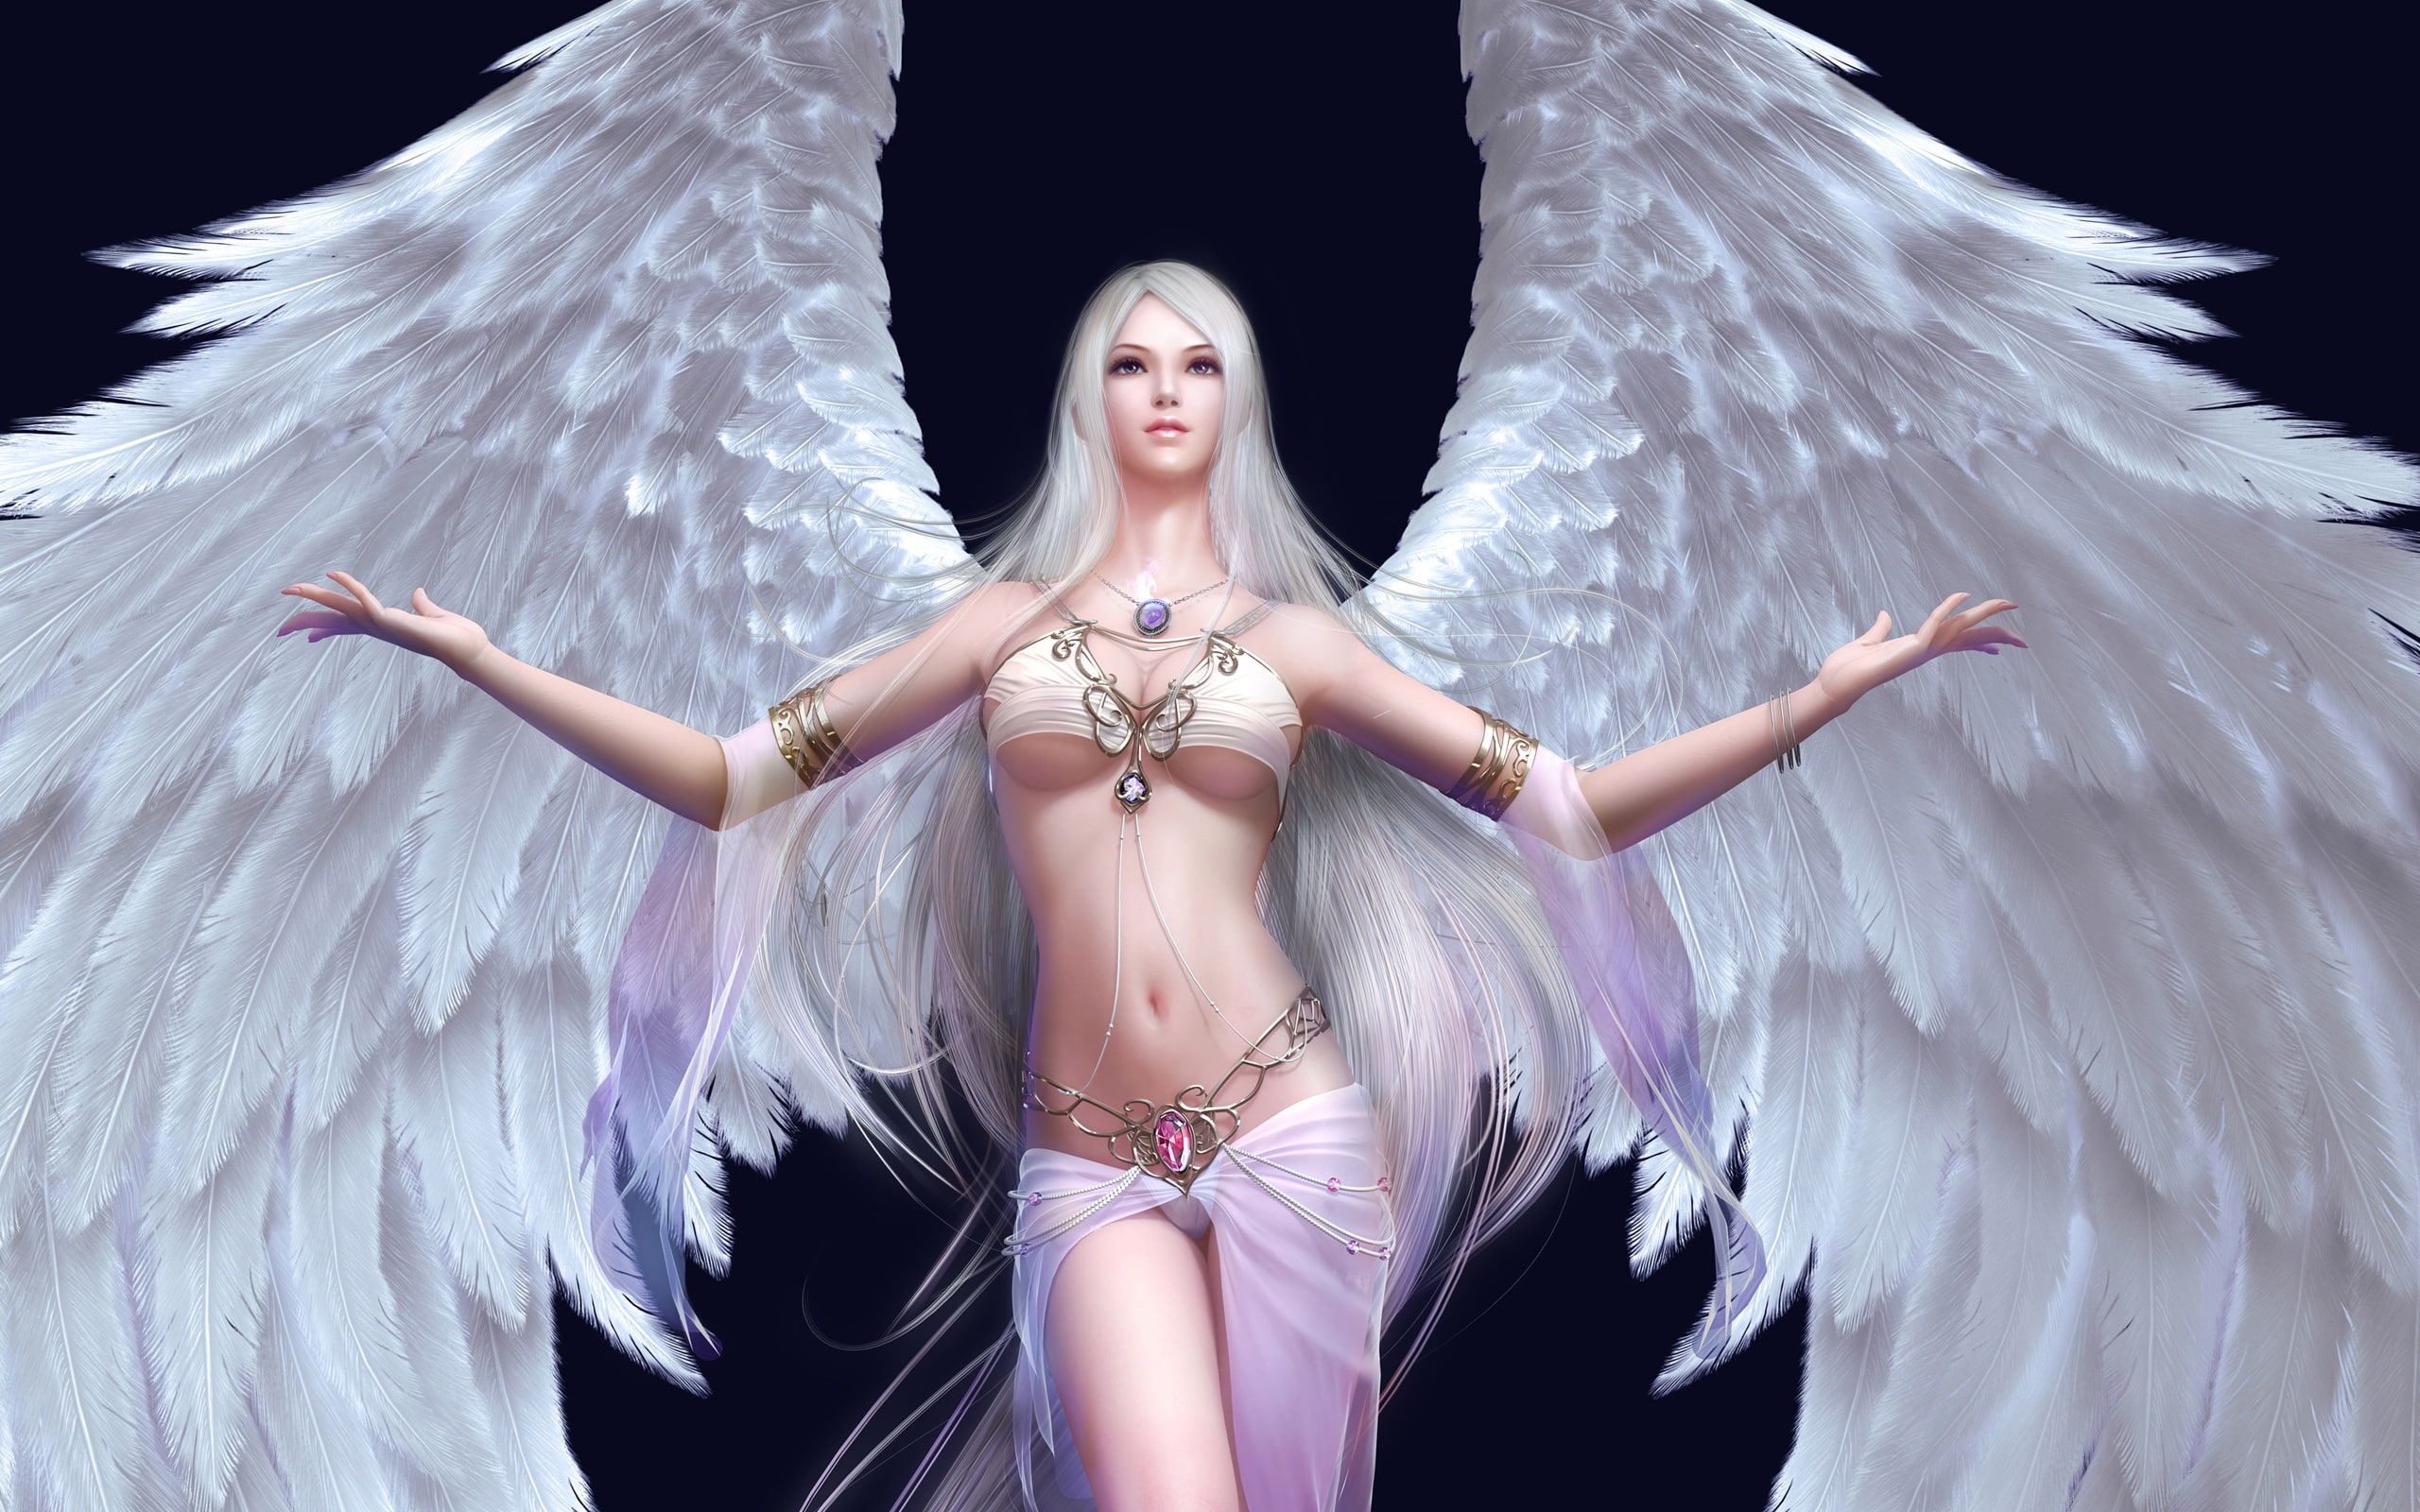 Girl white angel's wings, white haired woman with wings anime character